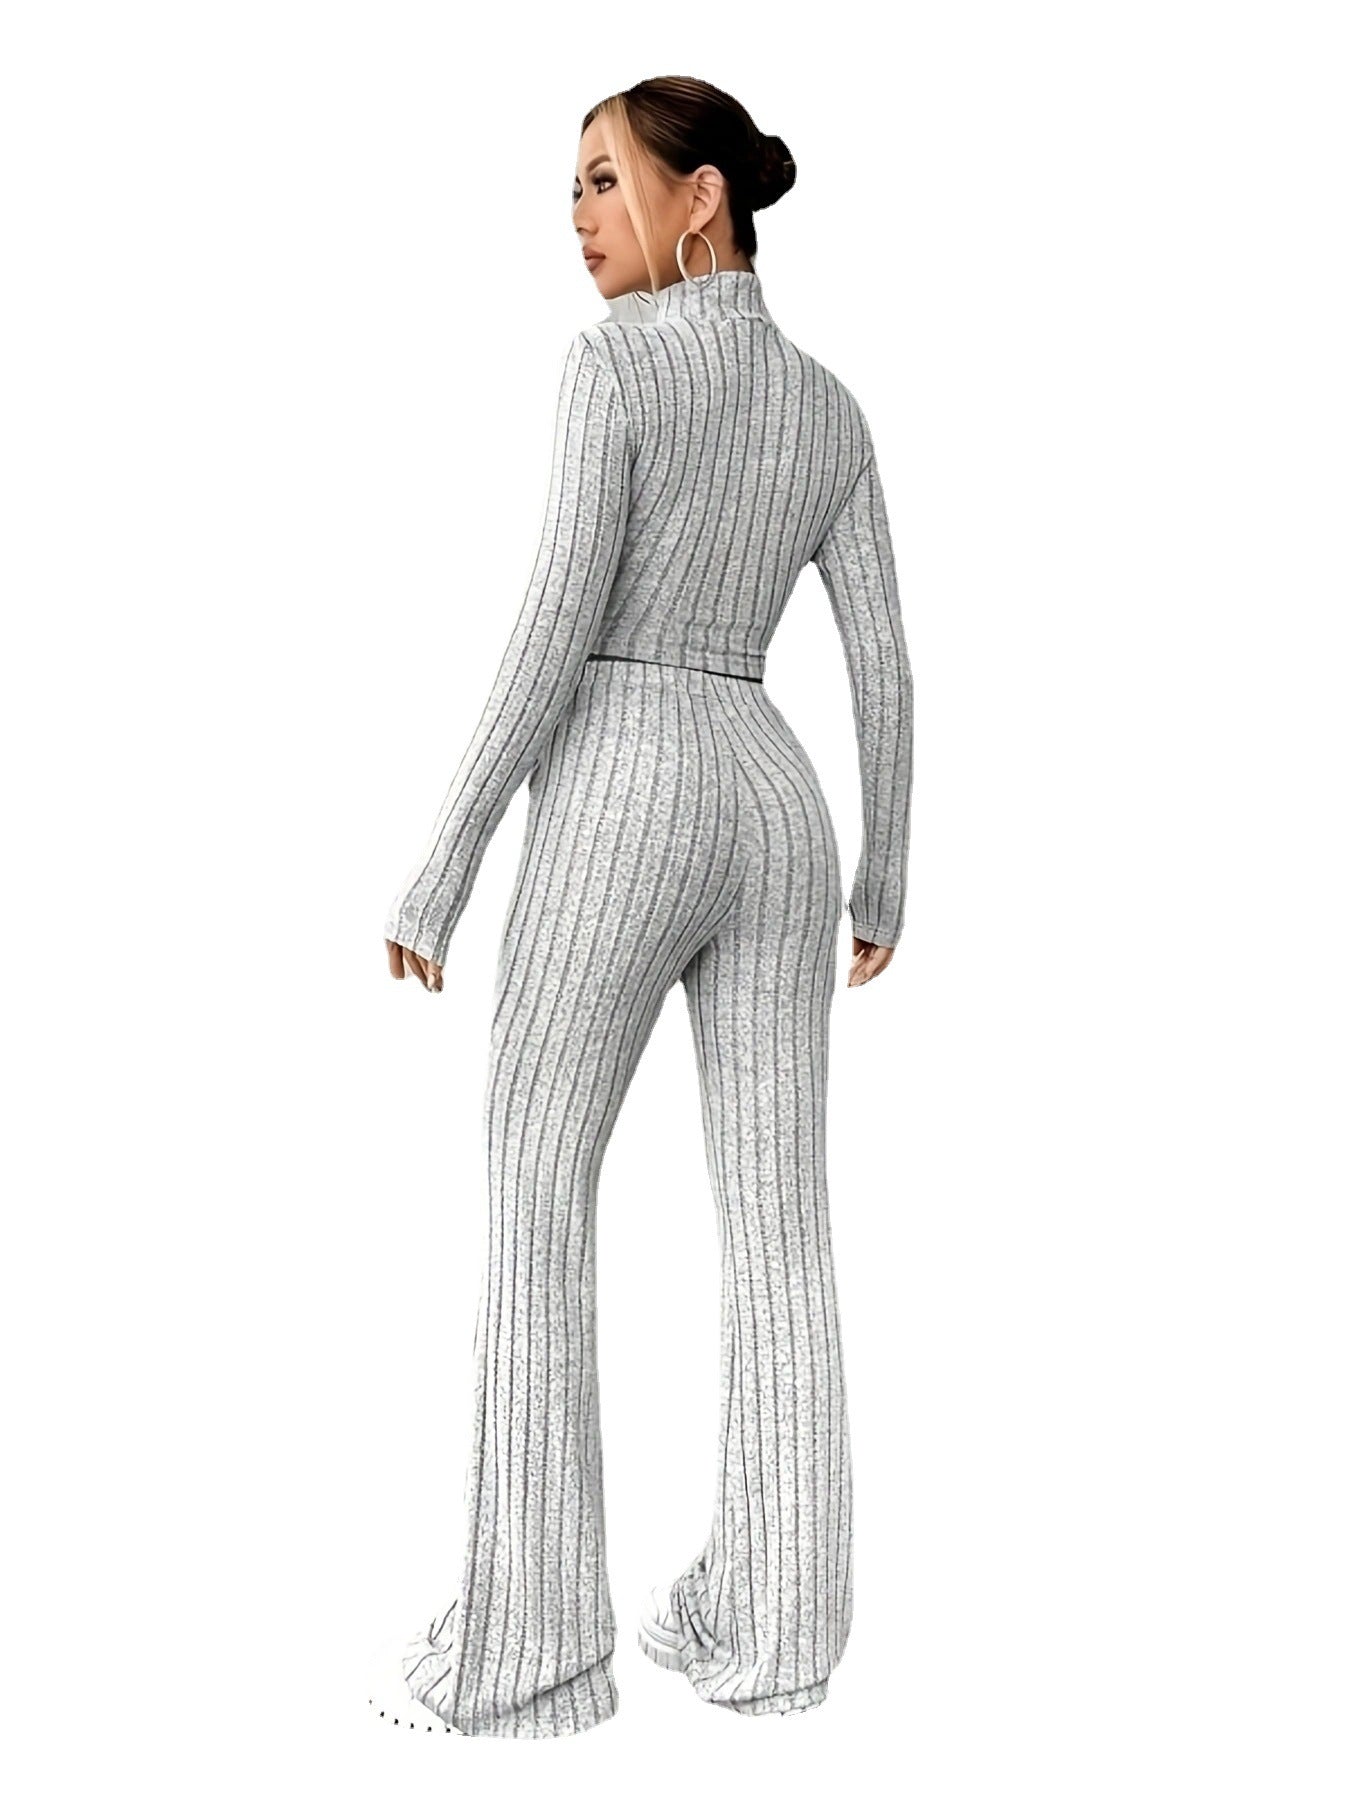 Solid Color Rib Fabric Women's Long-sleeved Knitwear And Trousers Suit